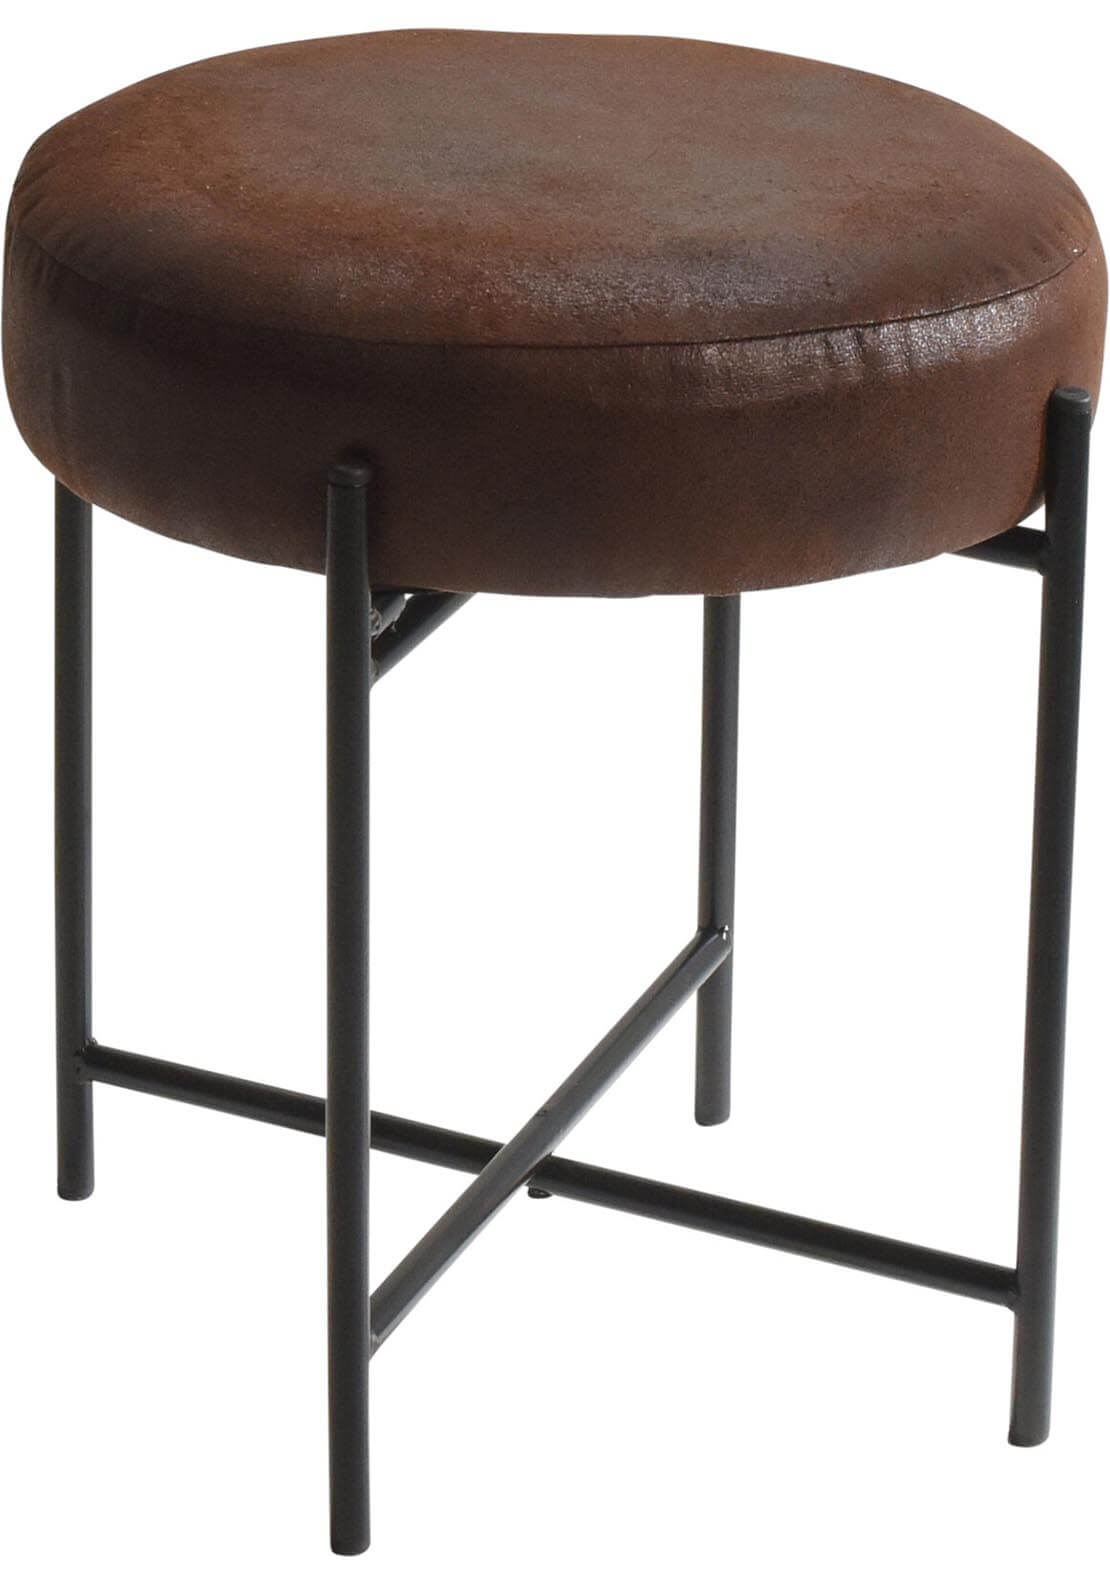 The Home Living Stool Round 36cm x 36cm x 42cm Suede 1 Shaws Department Stores